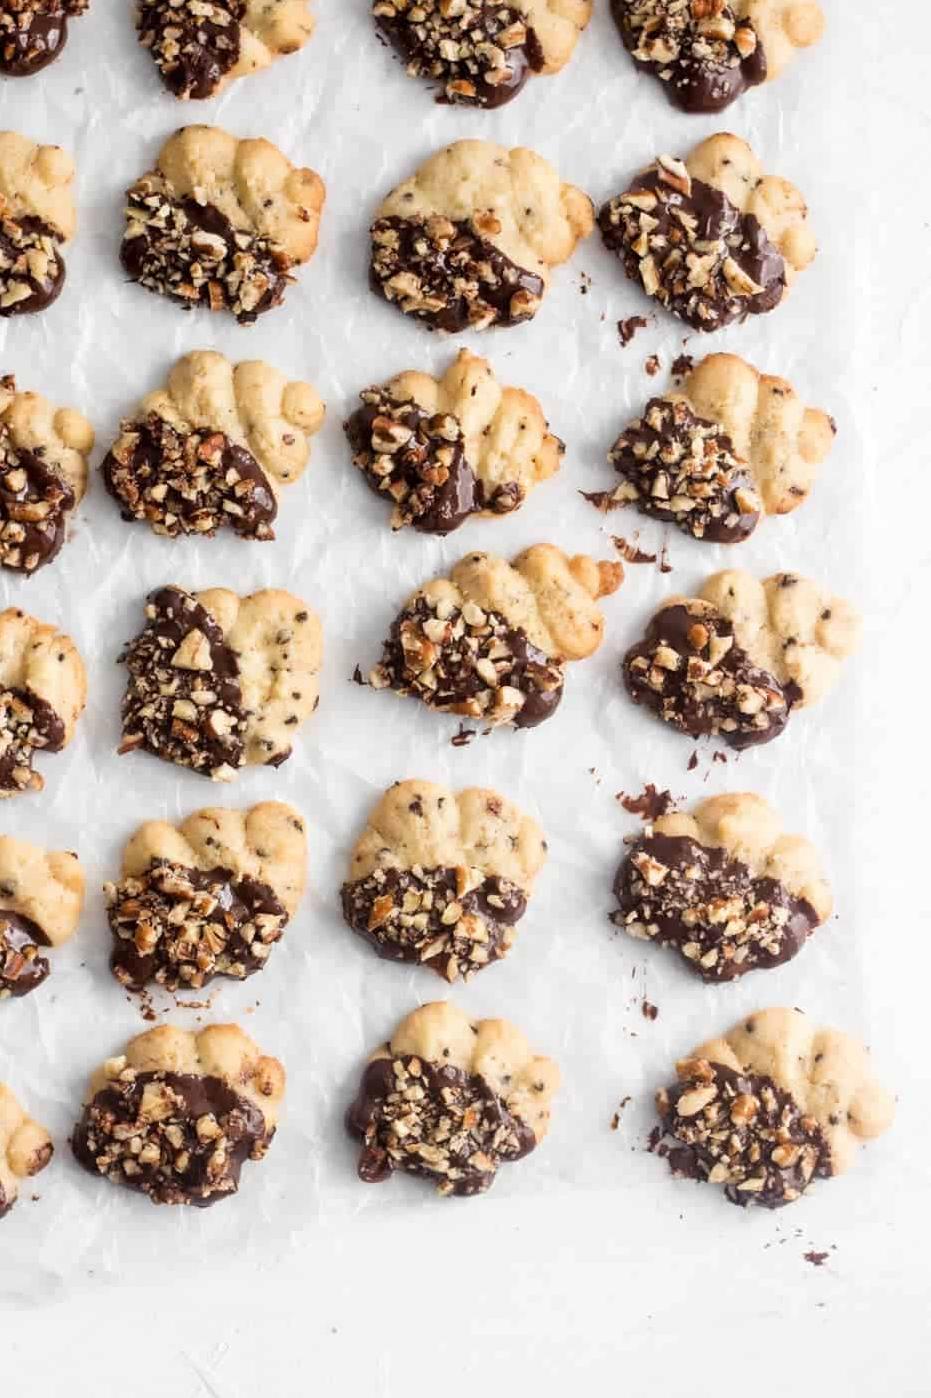  Make your cookie jar happy with these coffee-infused treats.